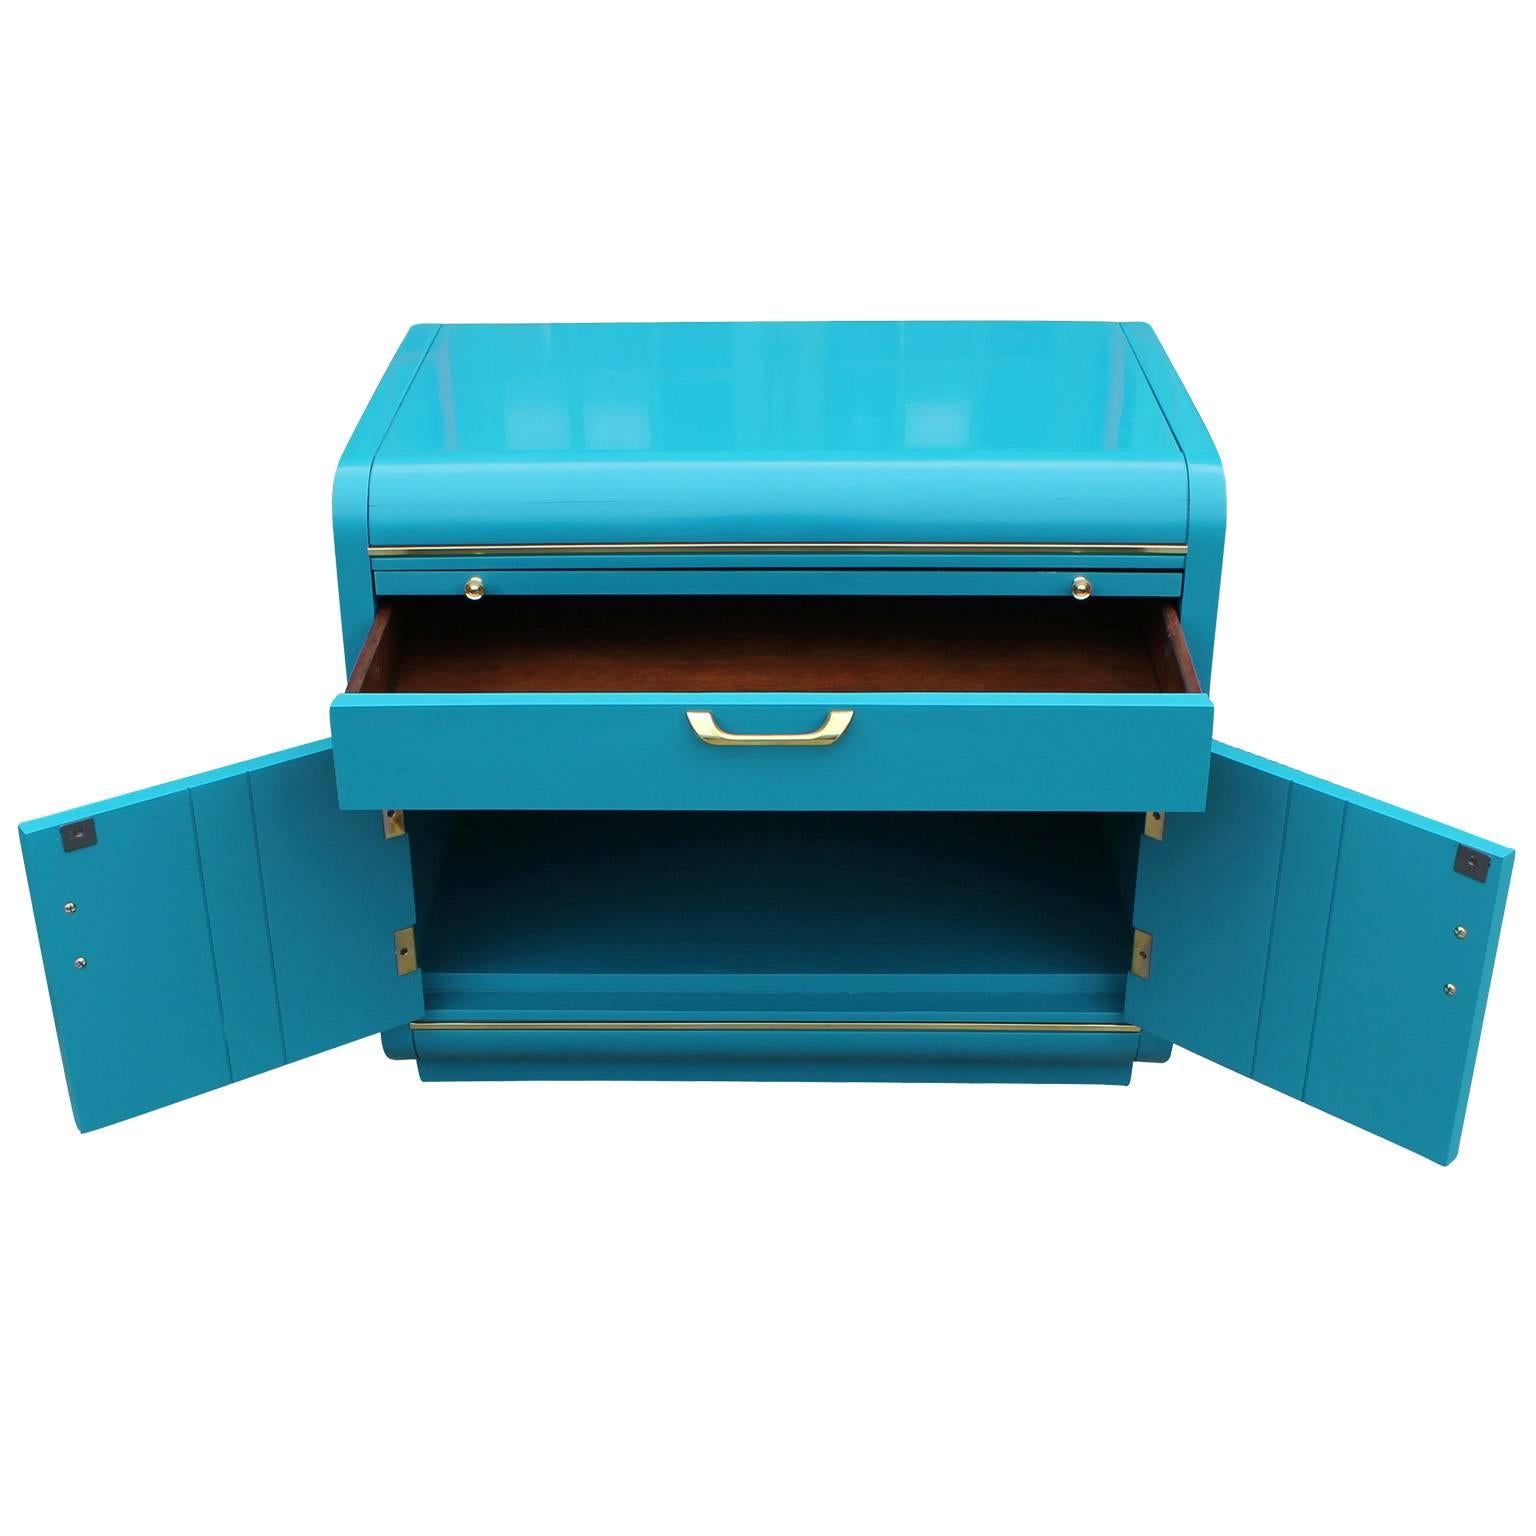 Late 20th Century Pair of Modern Turquoise Lacquer and Brass Hardware Night Stands